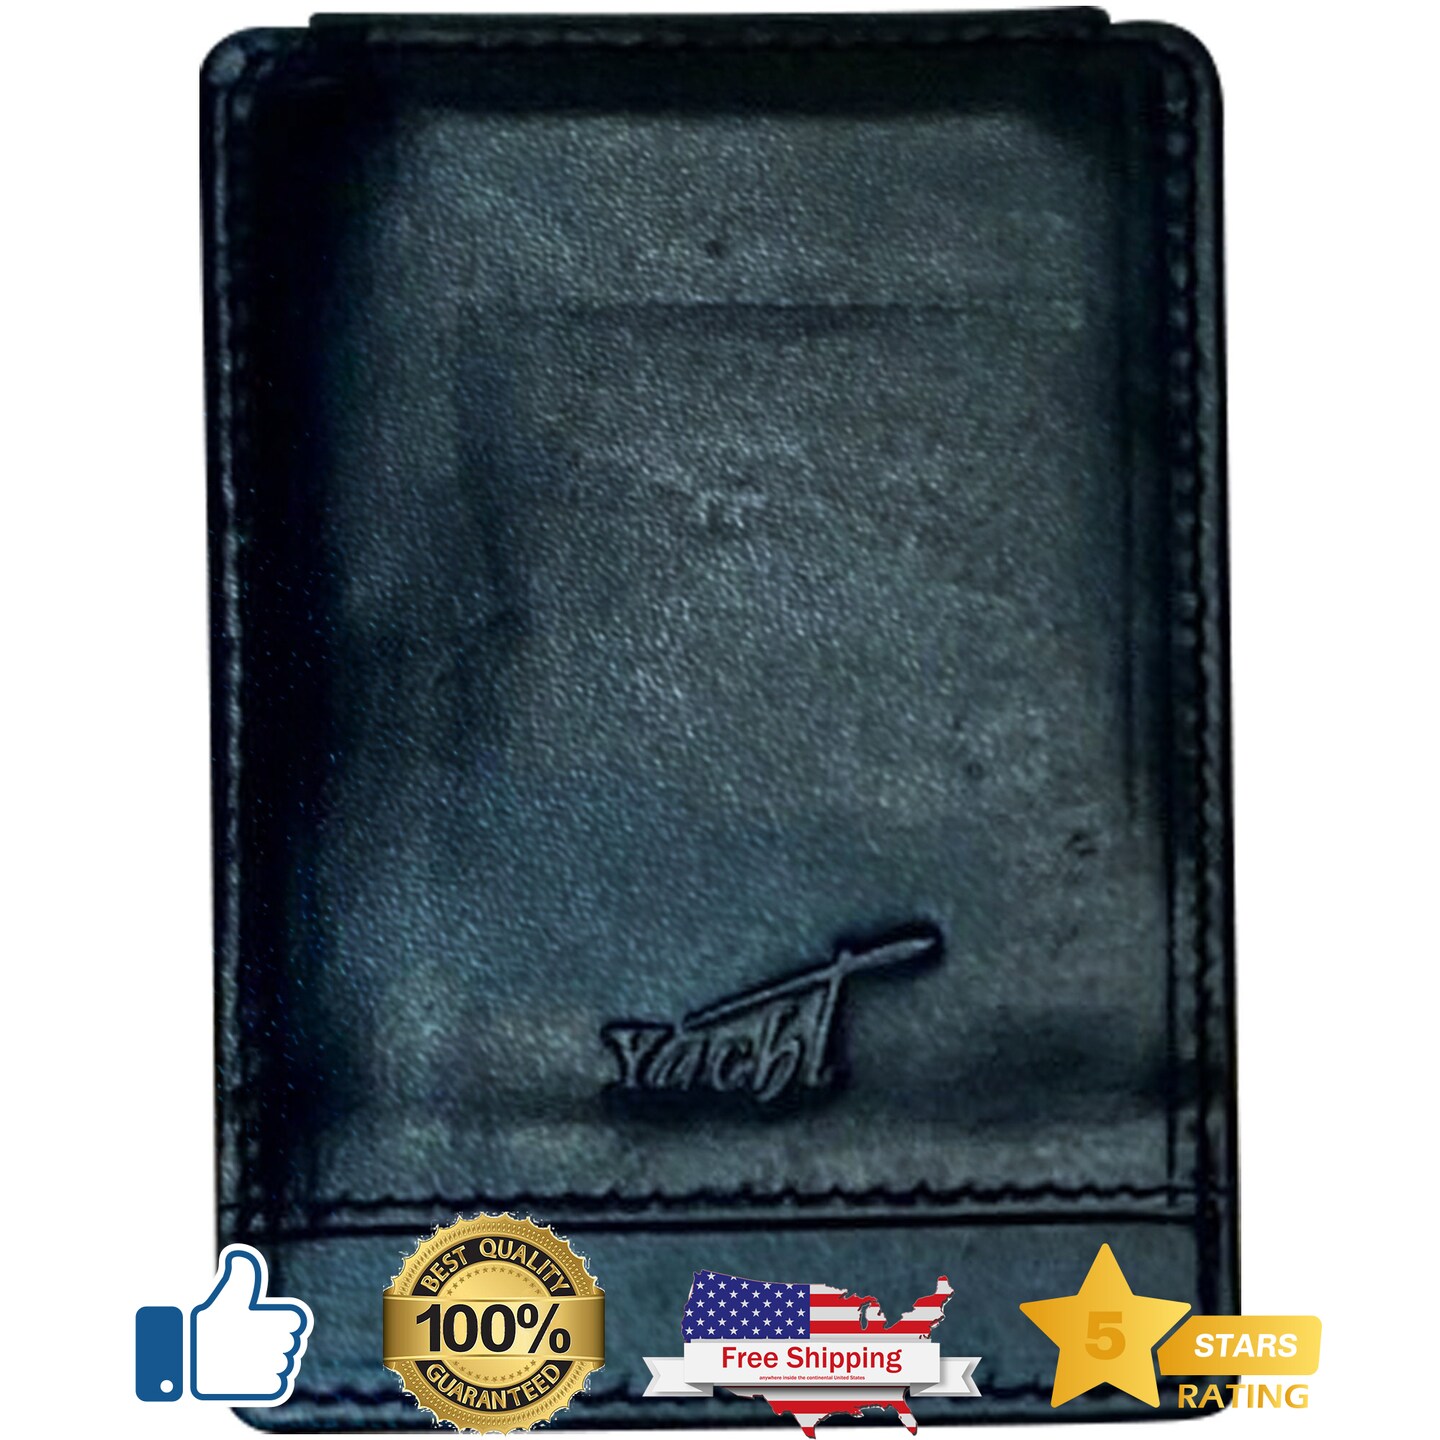 Mens Long Slim Leather Wallet - Personalized Mens Wallet